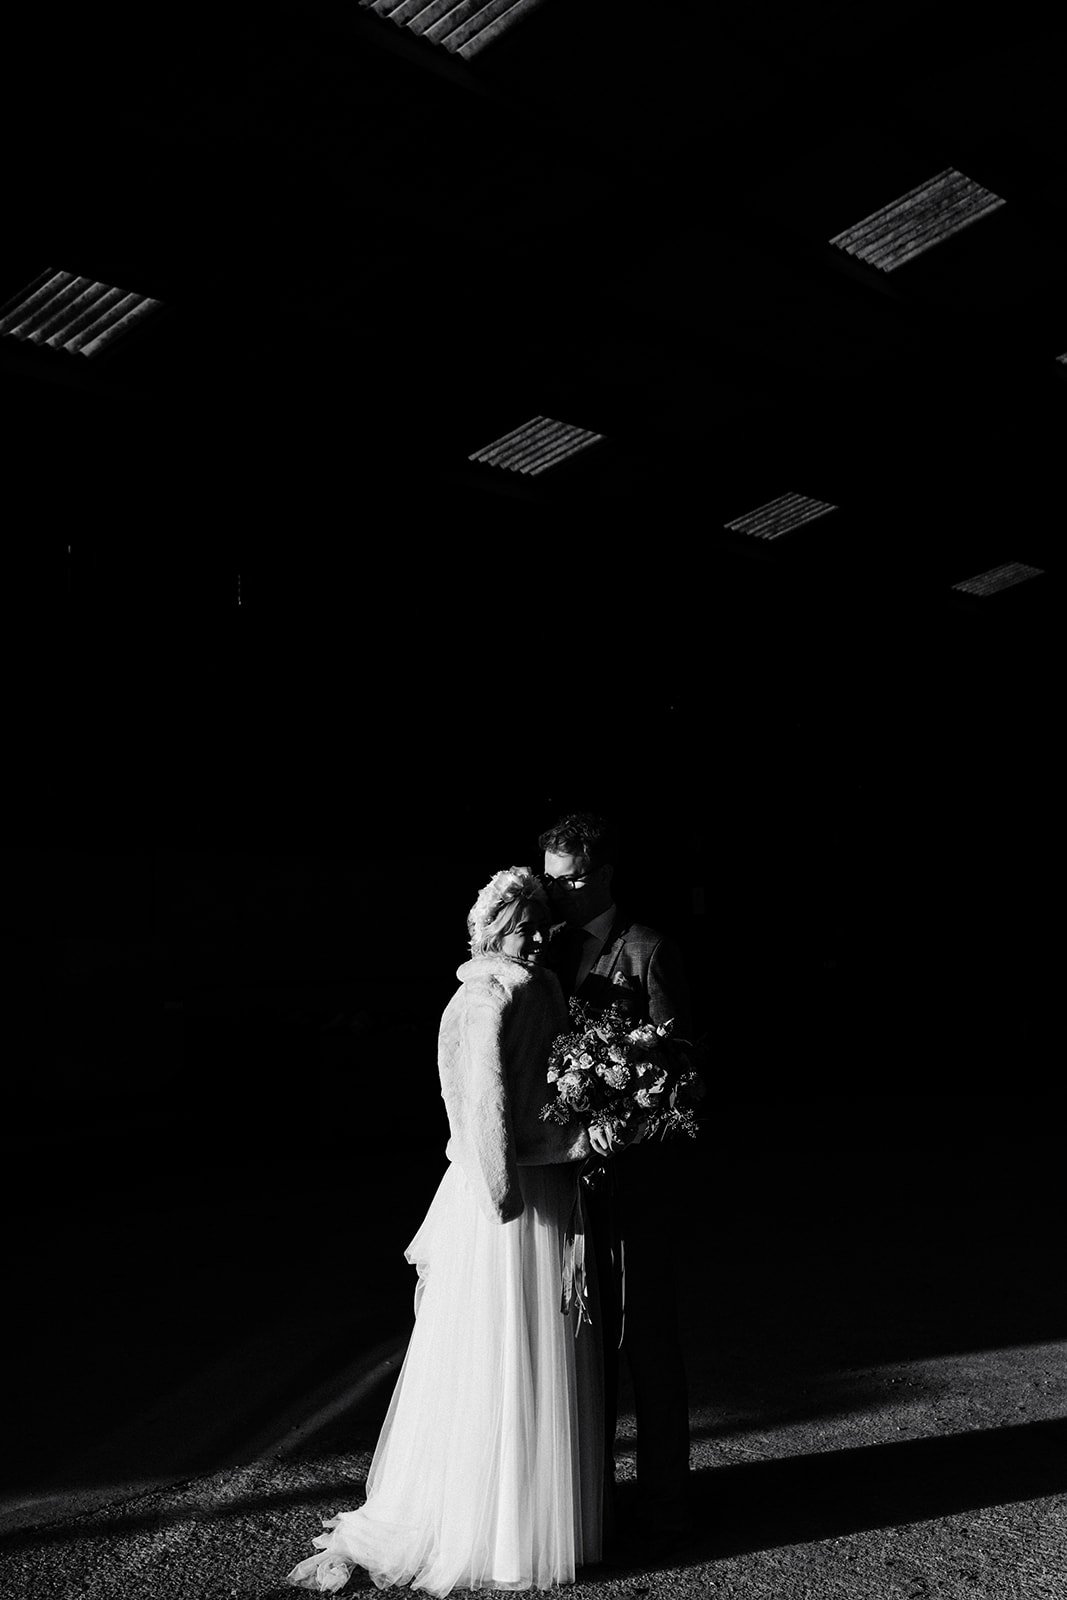 black and white portrait of a bride and groom standing in a barn wedding venue. the normans York wedding